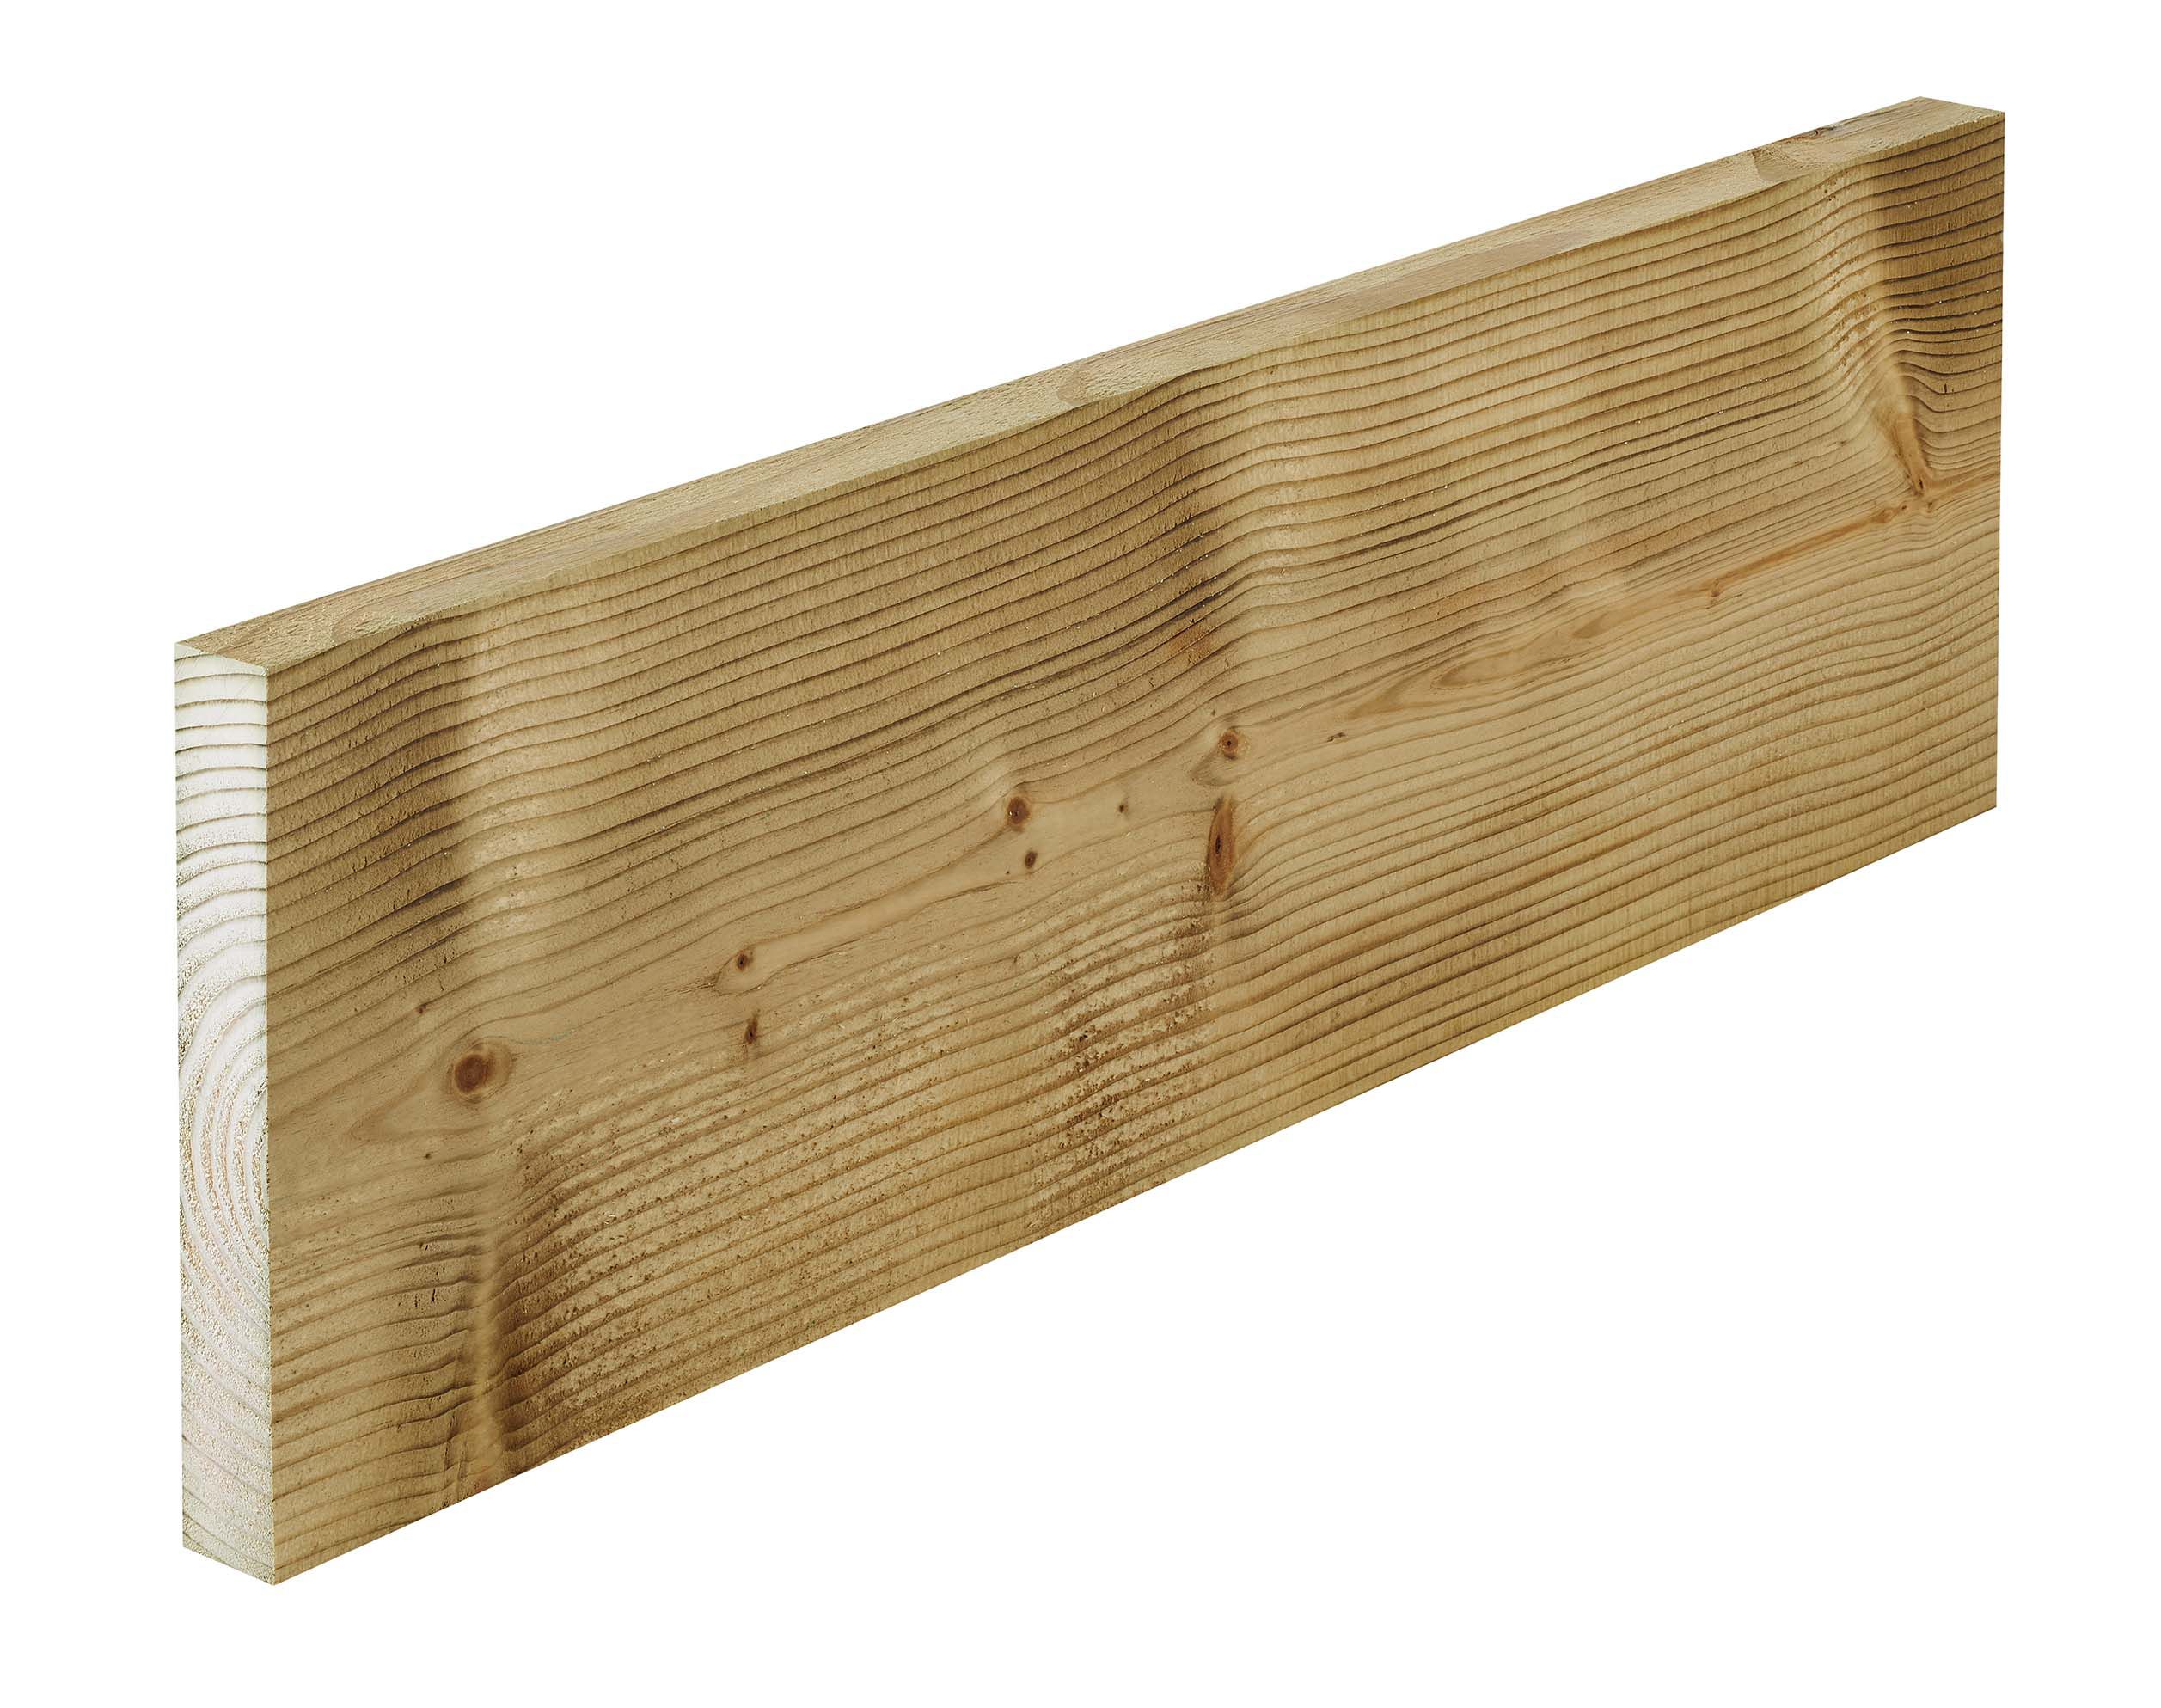 Sawn Treated Stick timber (L)2.4m (W)100mm (T)22mm, Pack of 8